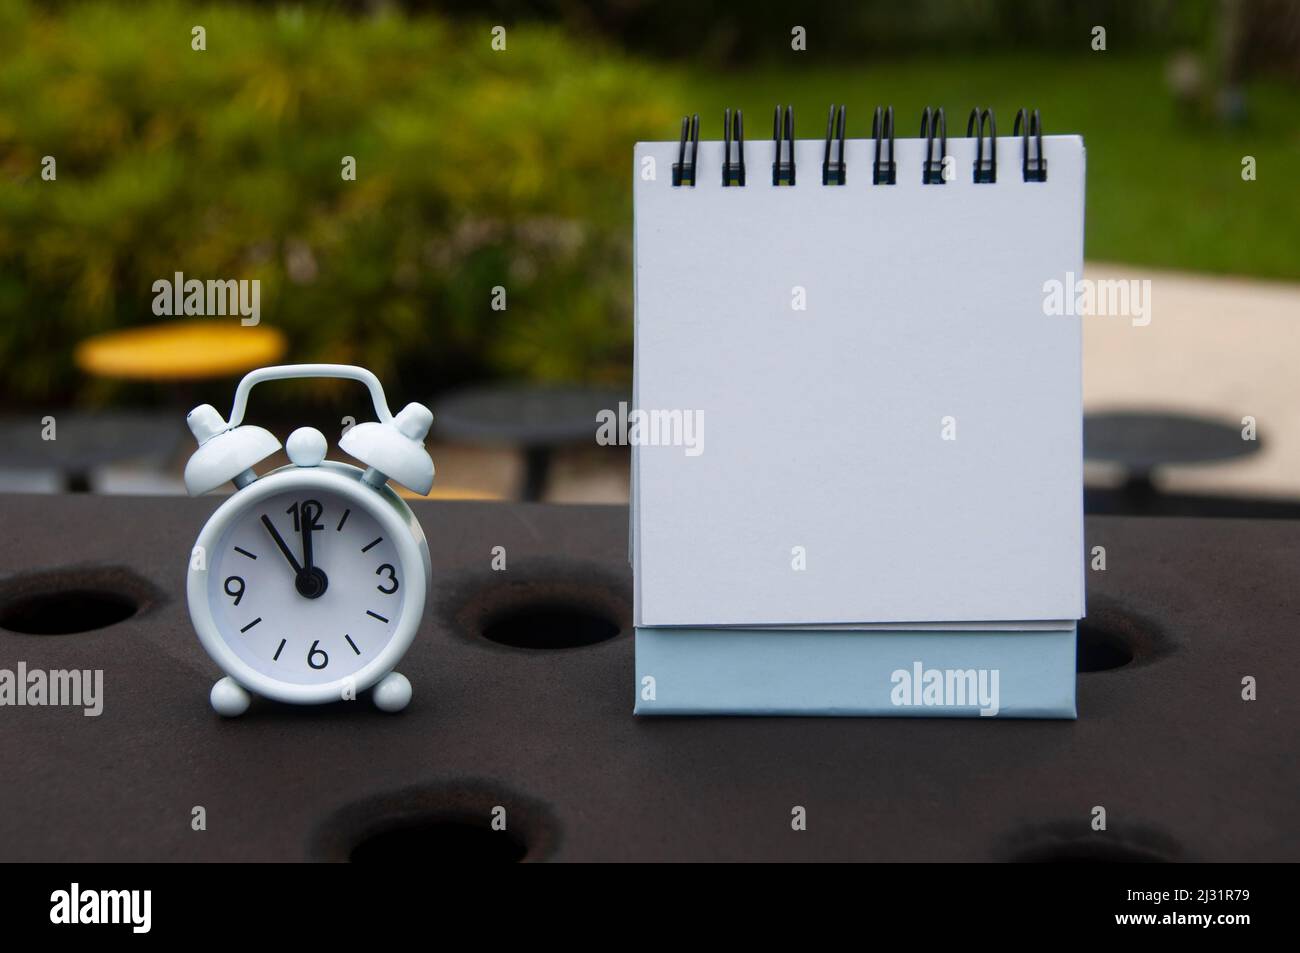 Alarm clock pointing at 11 o'clock with blank notepad. Blurred park background. Copy space Stock Photo